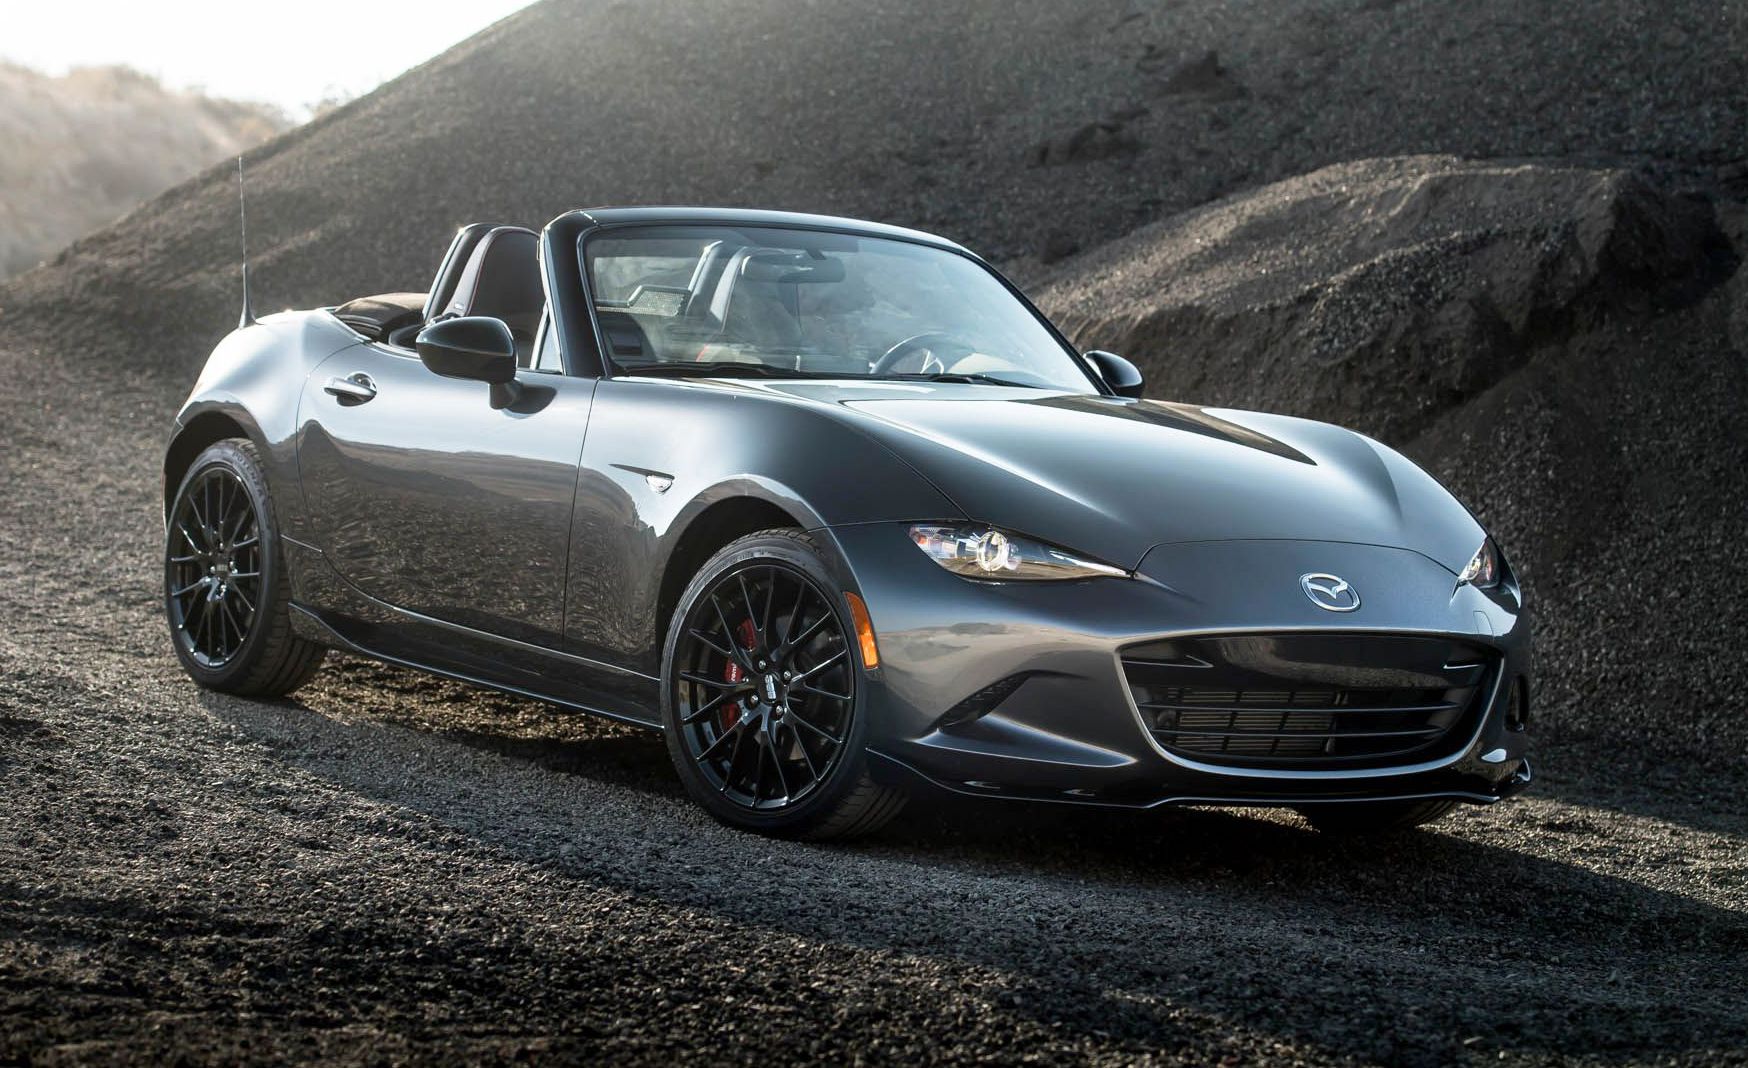 overzien B olie betalen Why Buy Mazda's MX-5 Miata? The Sports Car Is Even Better for 2019